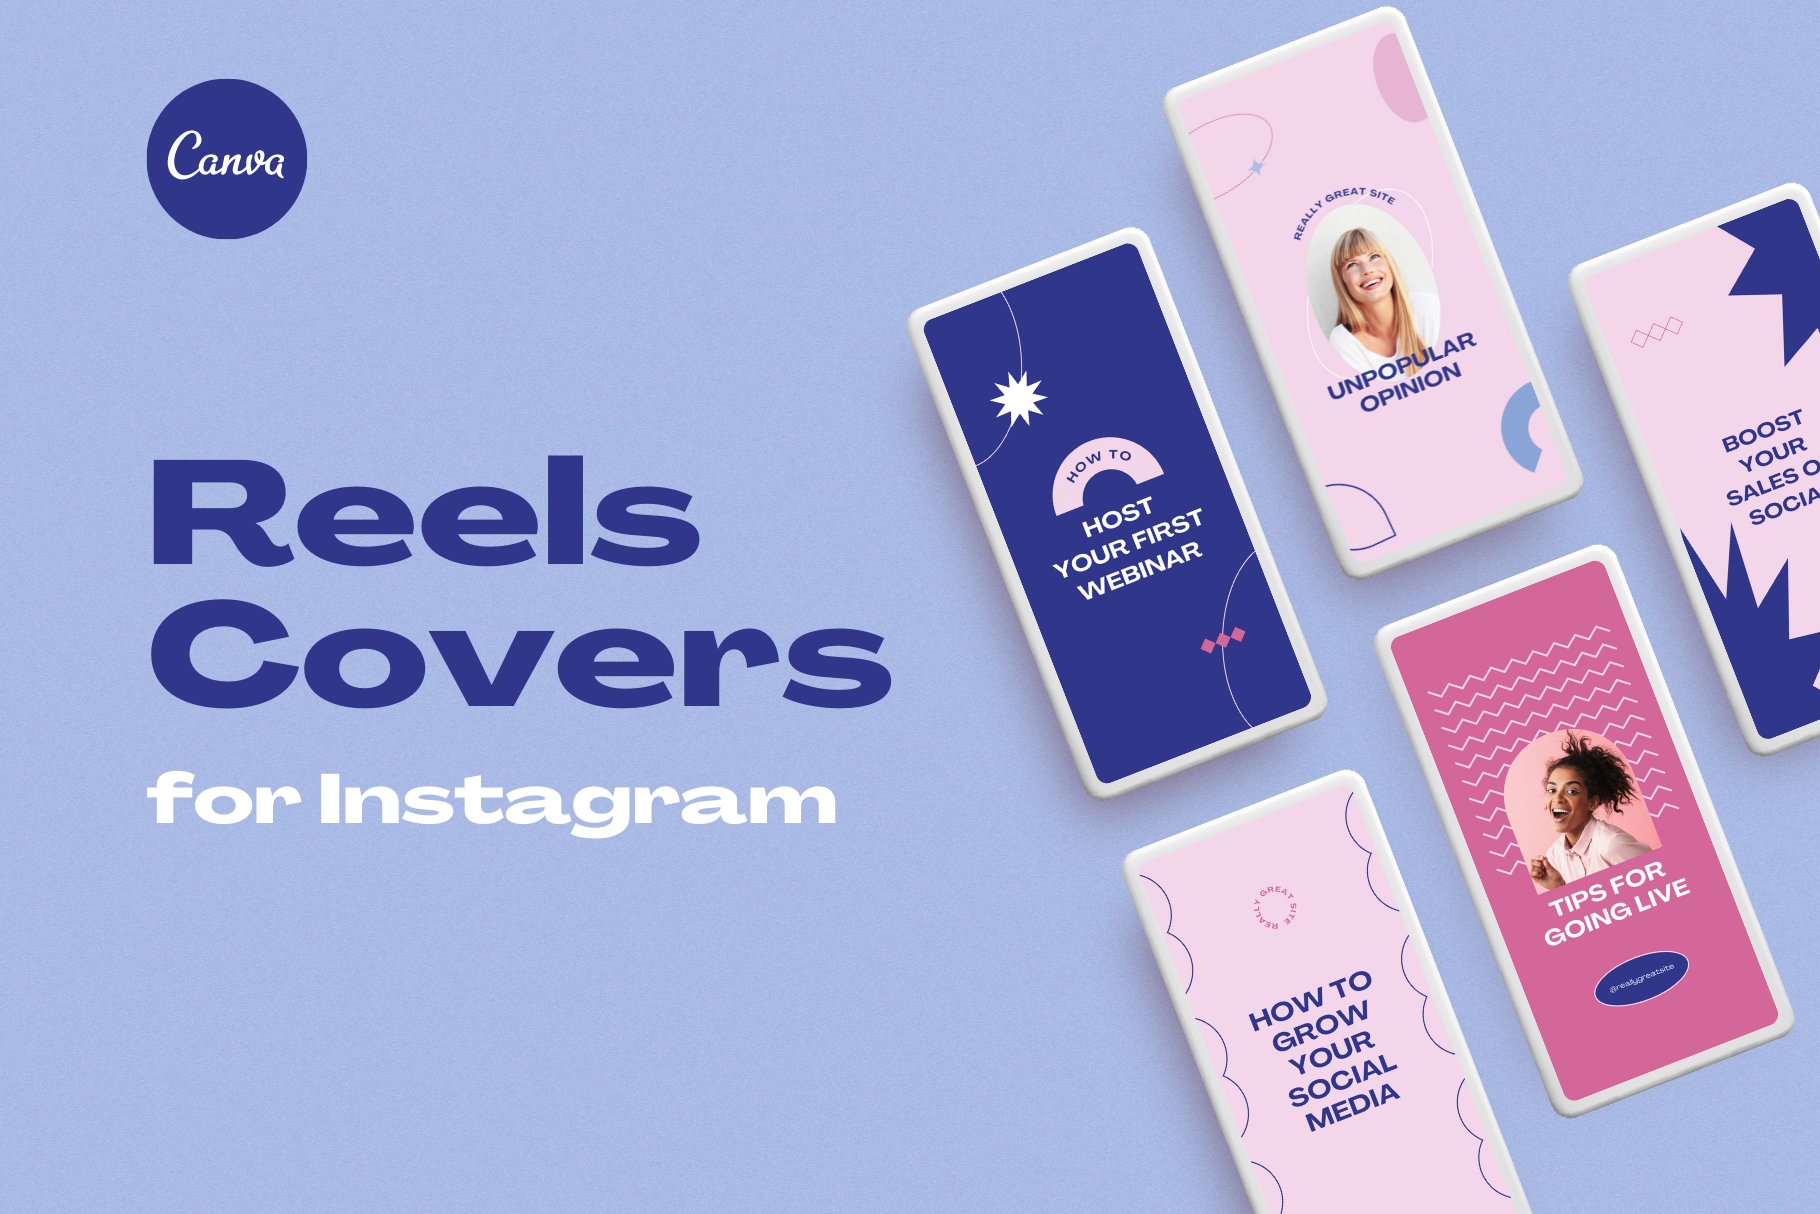 Reels Covers for Instagram cover image.